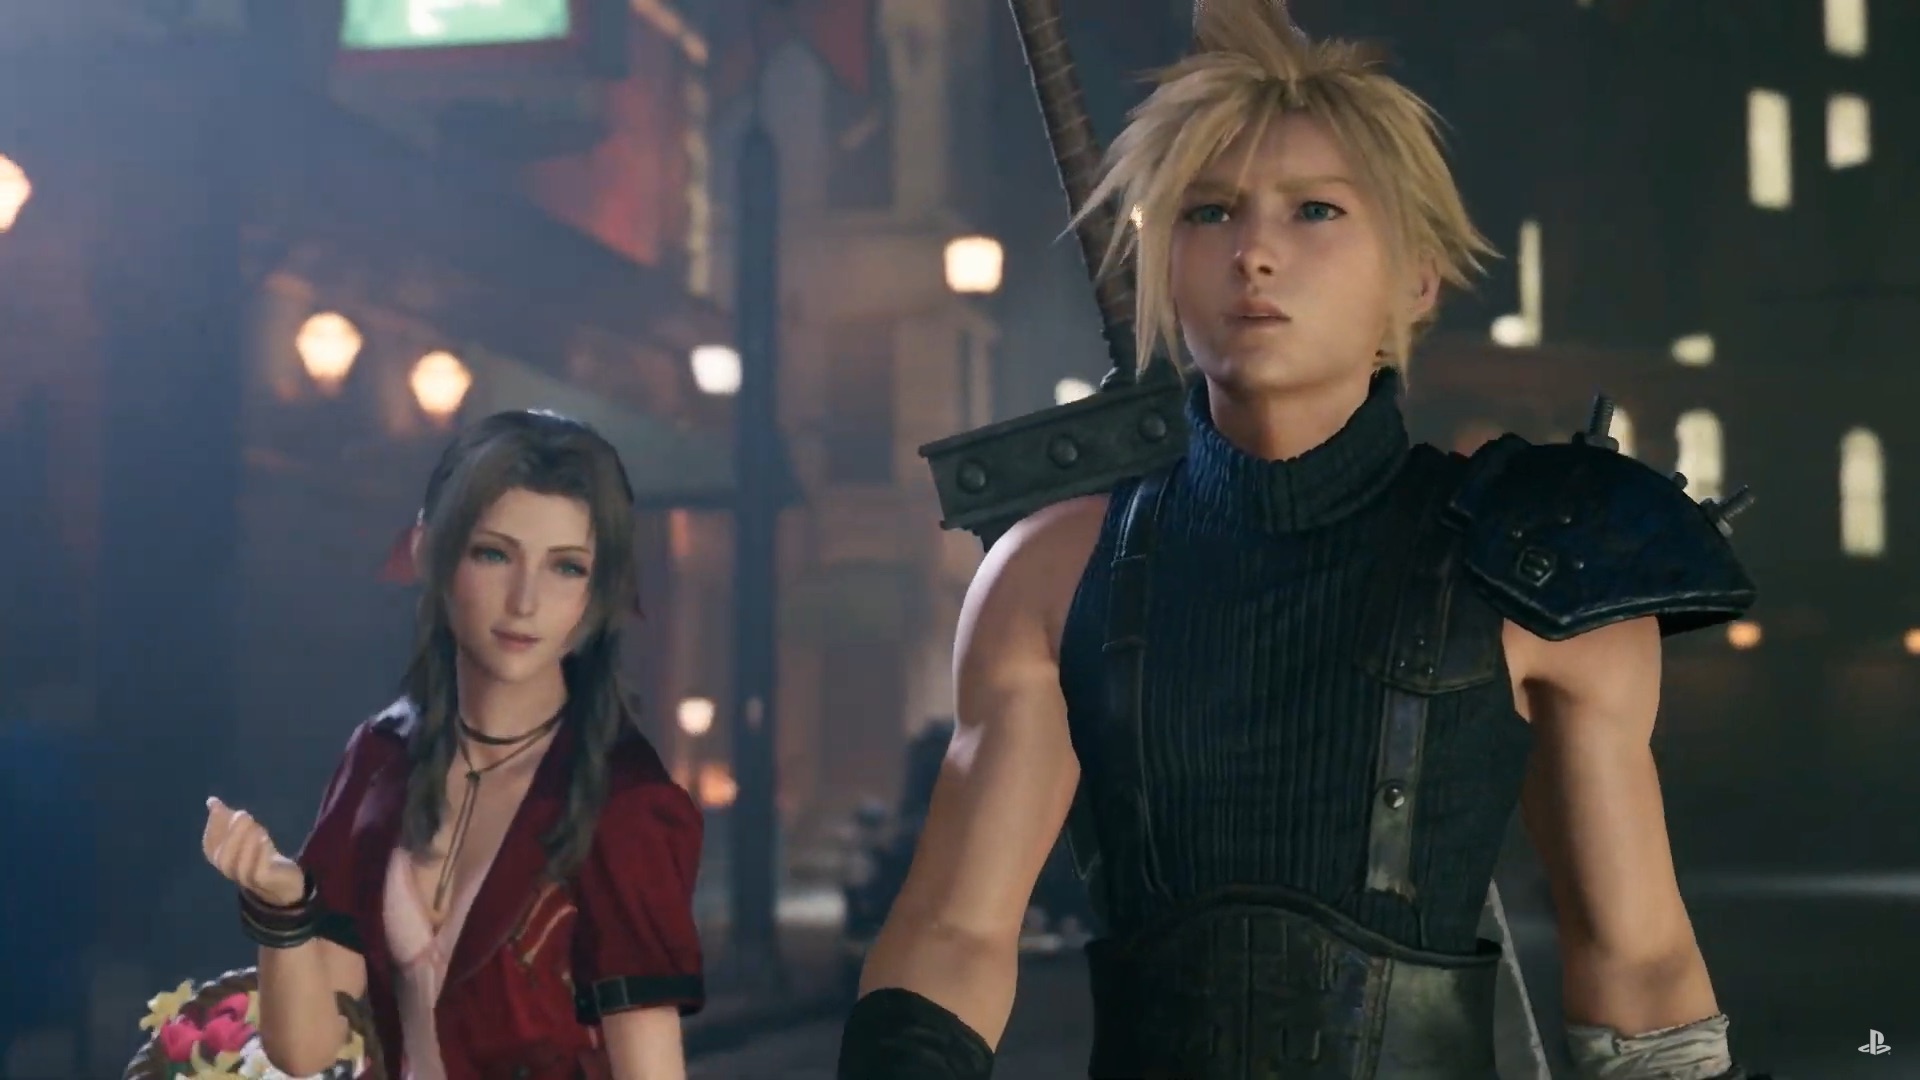 Final Fantasy 7 Remake Combat Offers Real-Time and Tactical